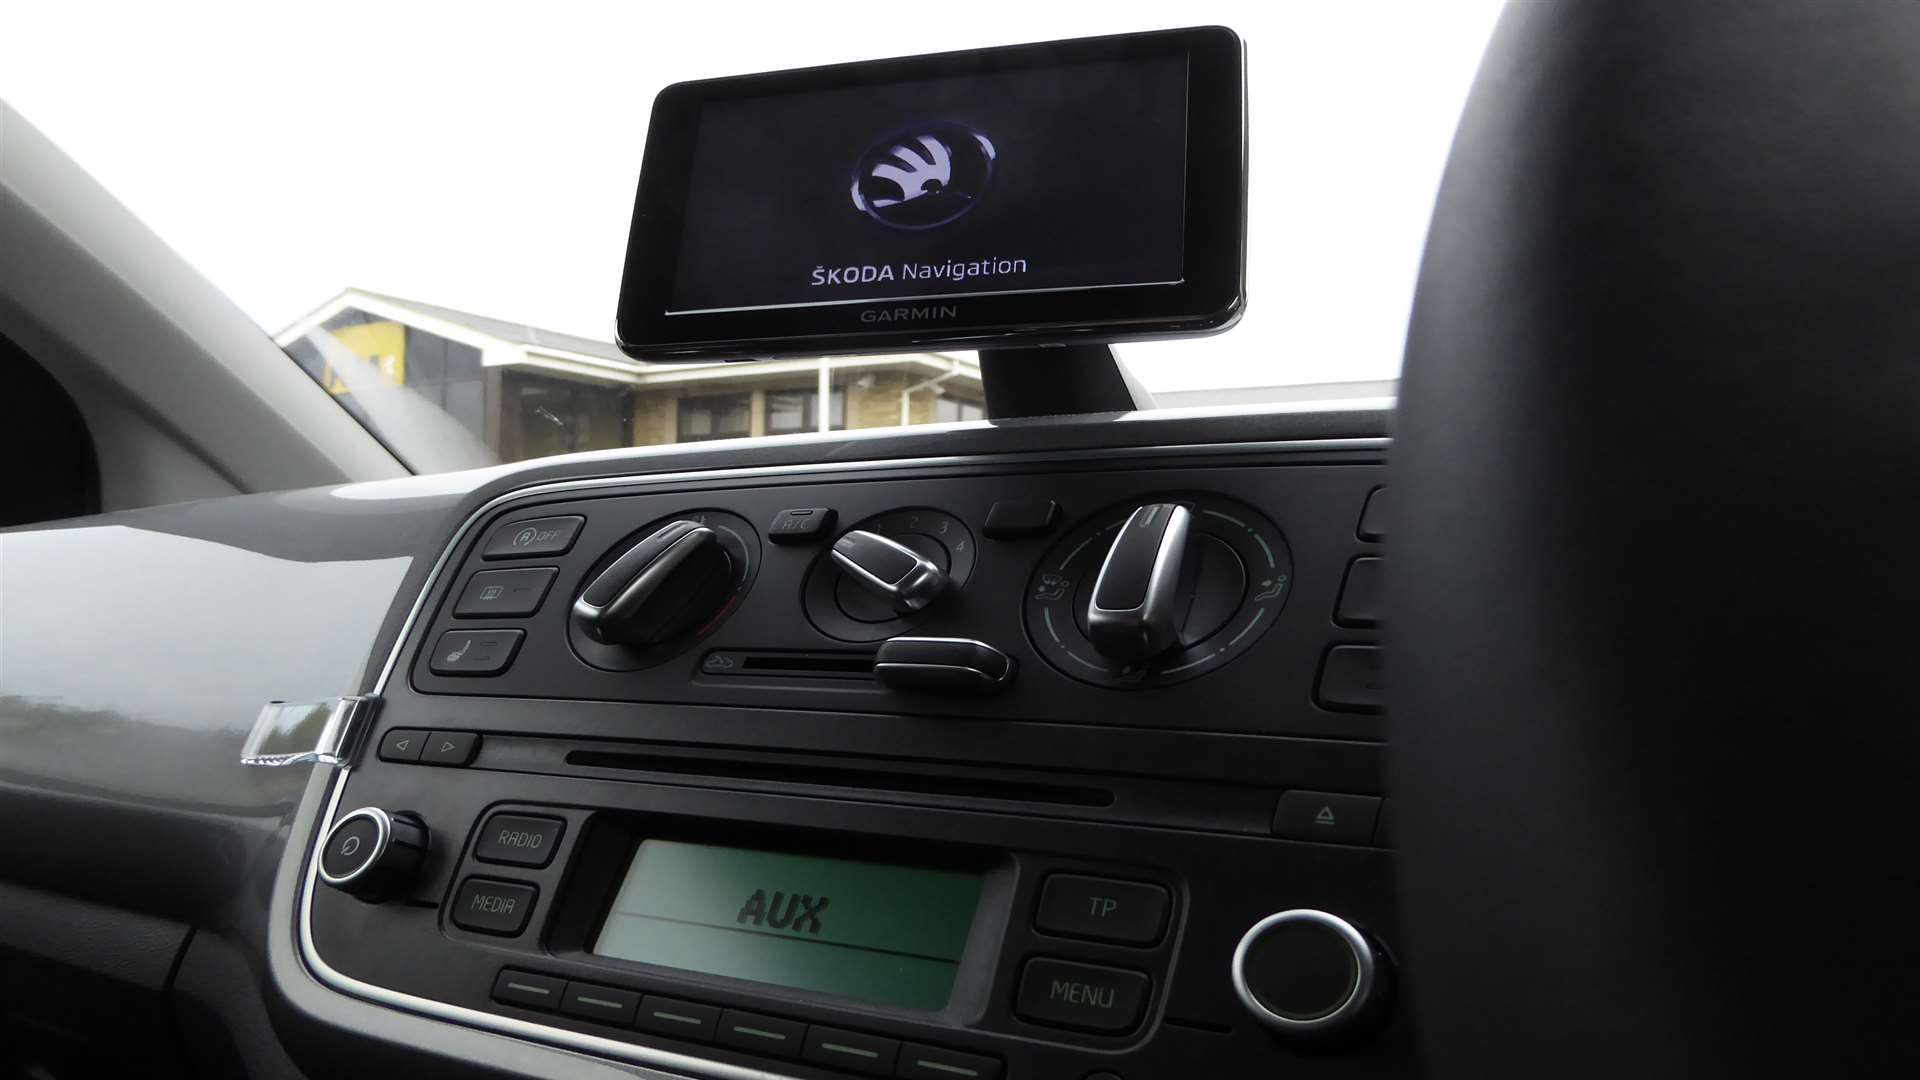 Top of the range models are equipped with Garmin sat nav units